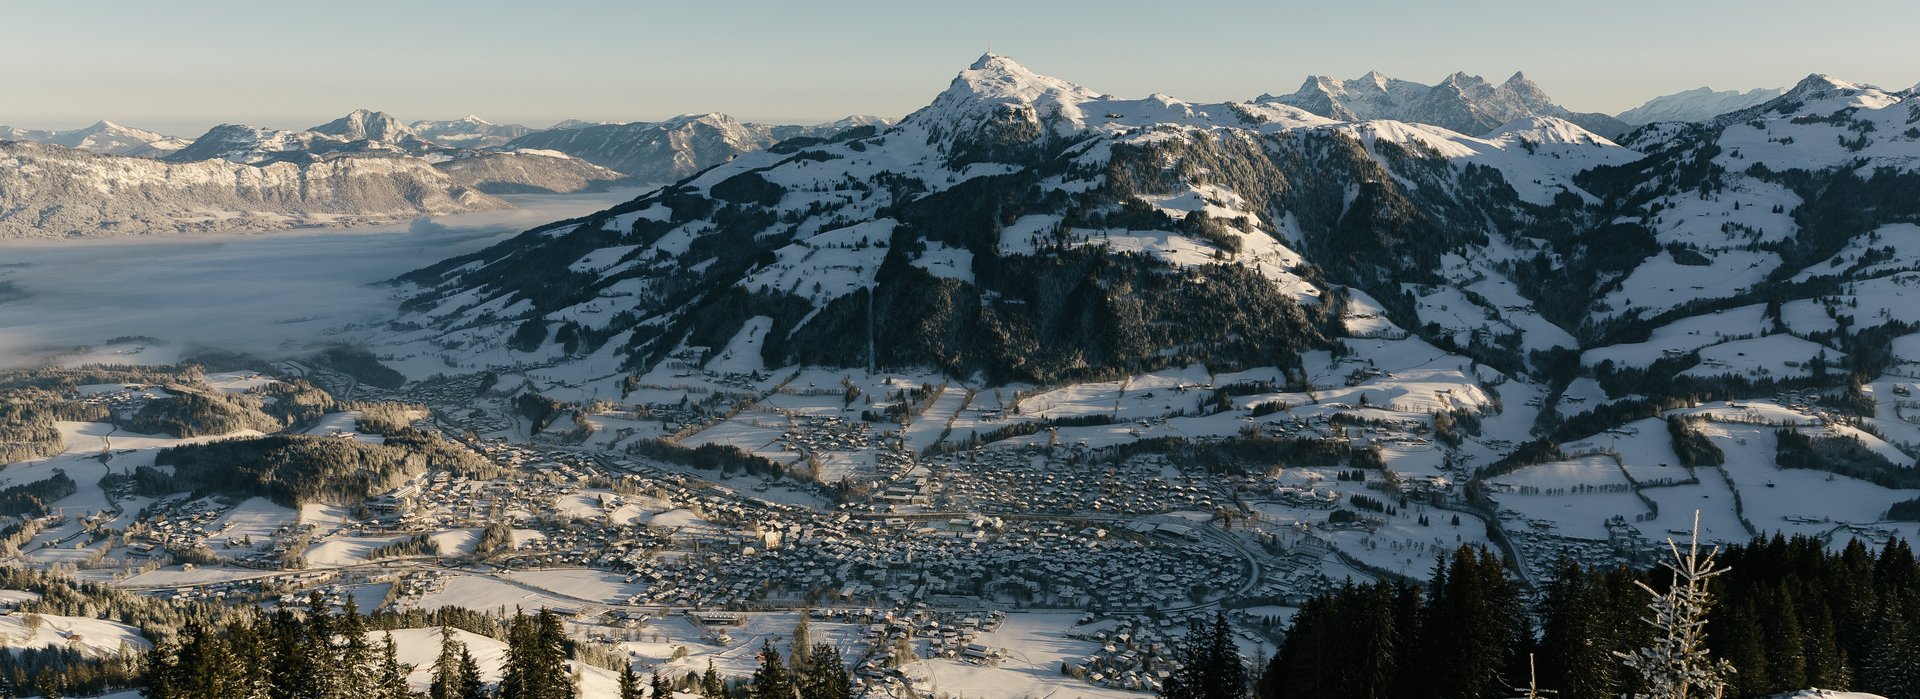 View of the Kitzbüheler Horn and the town of Kitzbühel